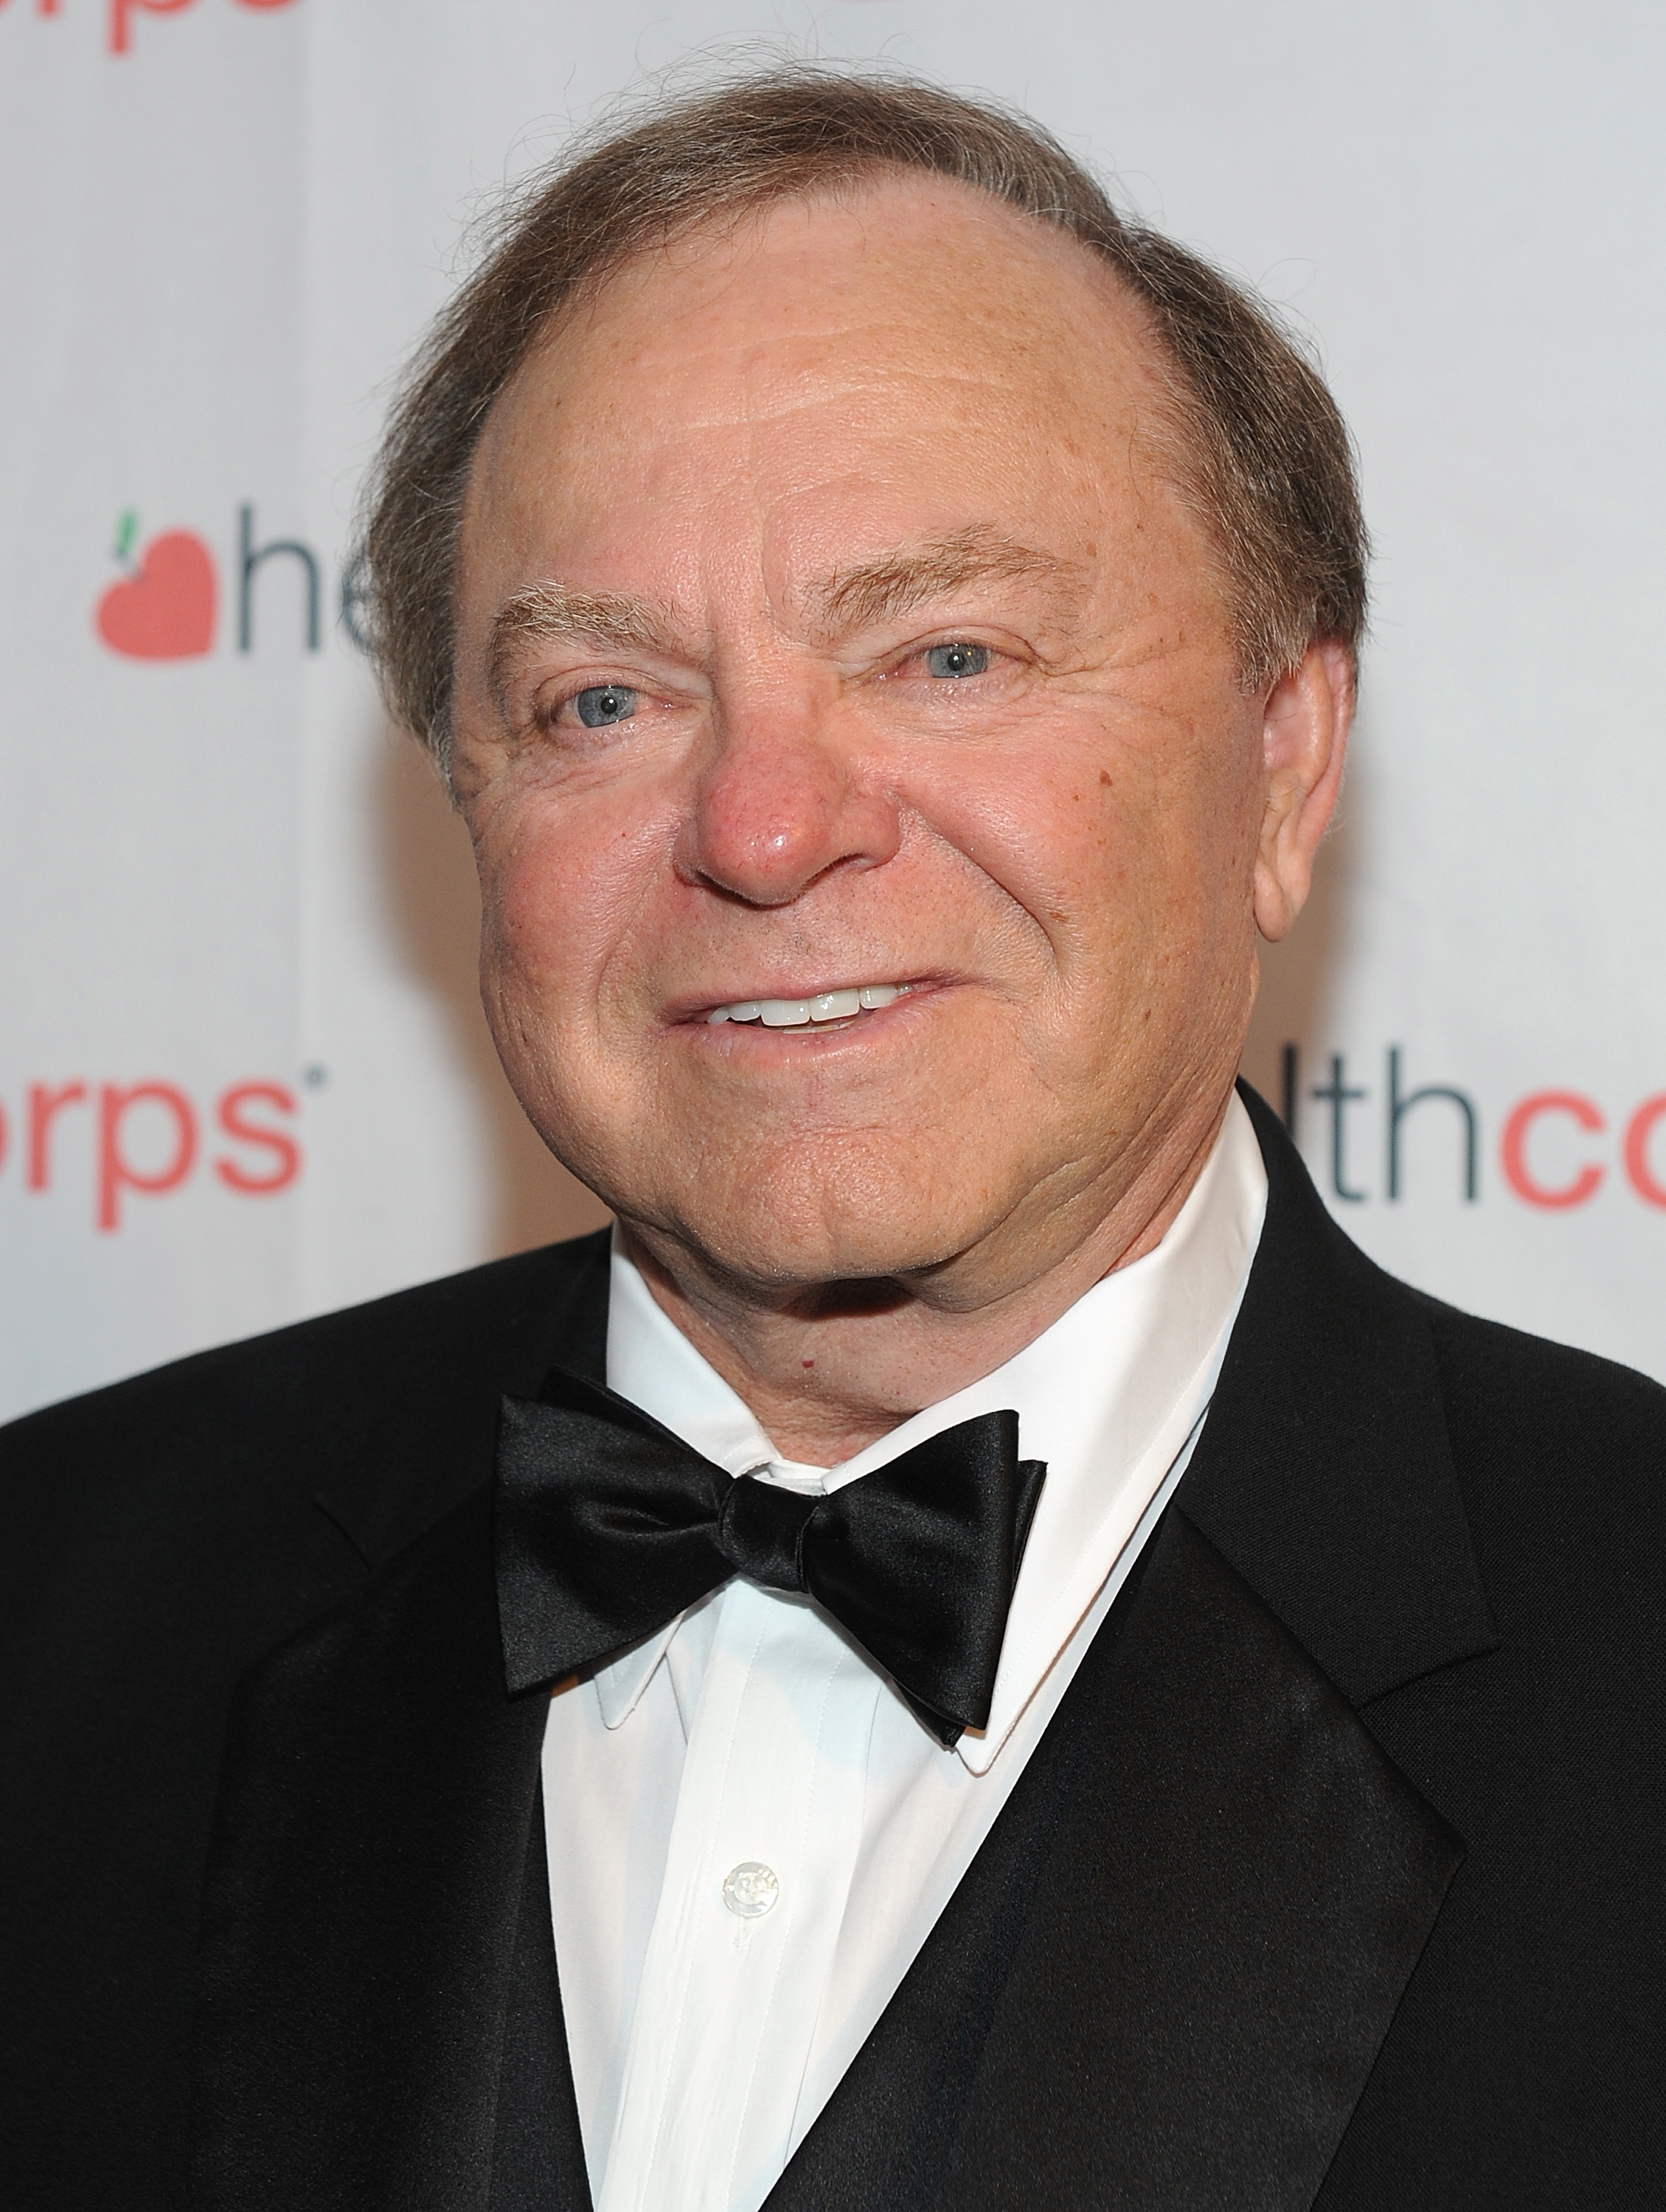 Harold Hamm ,CEO of Continental Resources, attends the 7th Annual Heath Corps Grassroots Garden Gala at Gotham Hall on April 17, 2013 in New York City. (Brad Barket&amp;mdash;Getty Images)